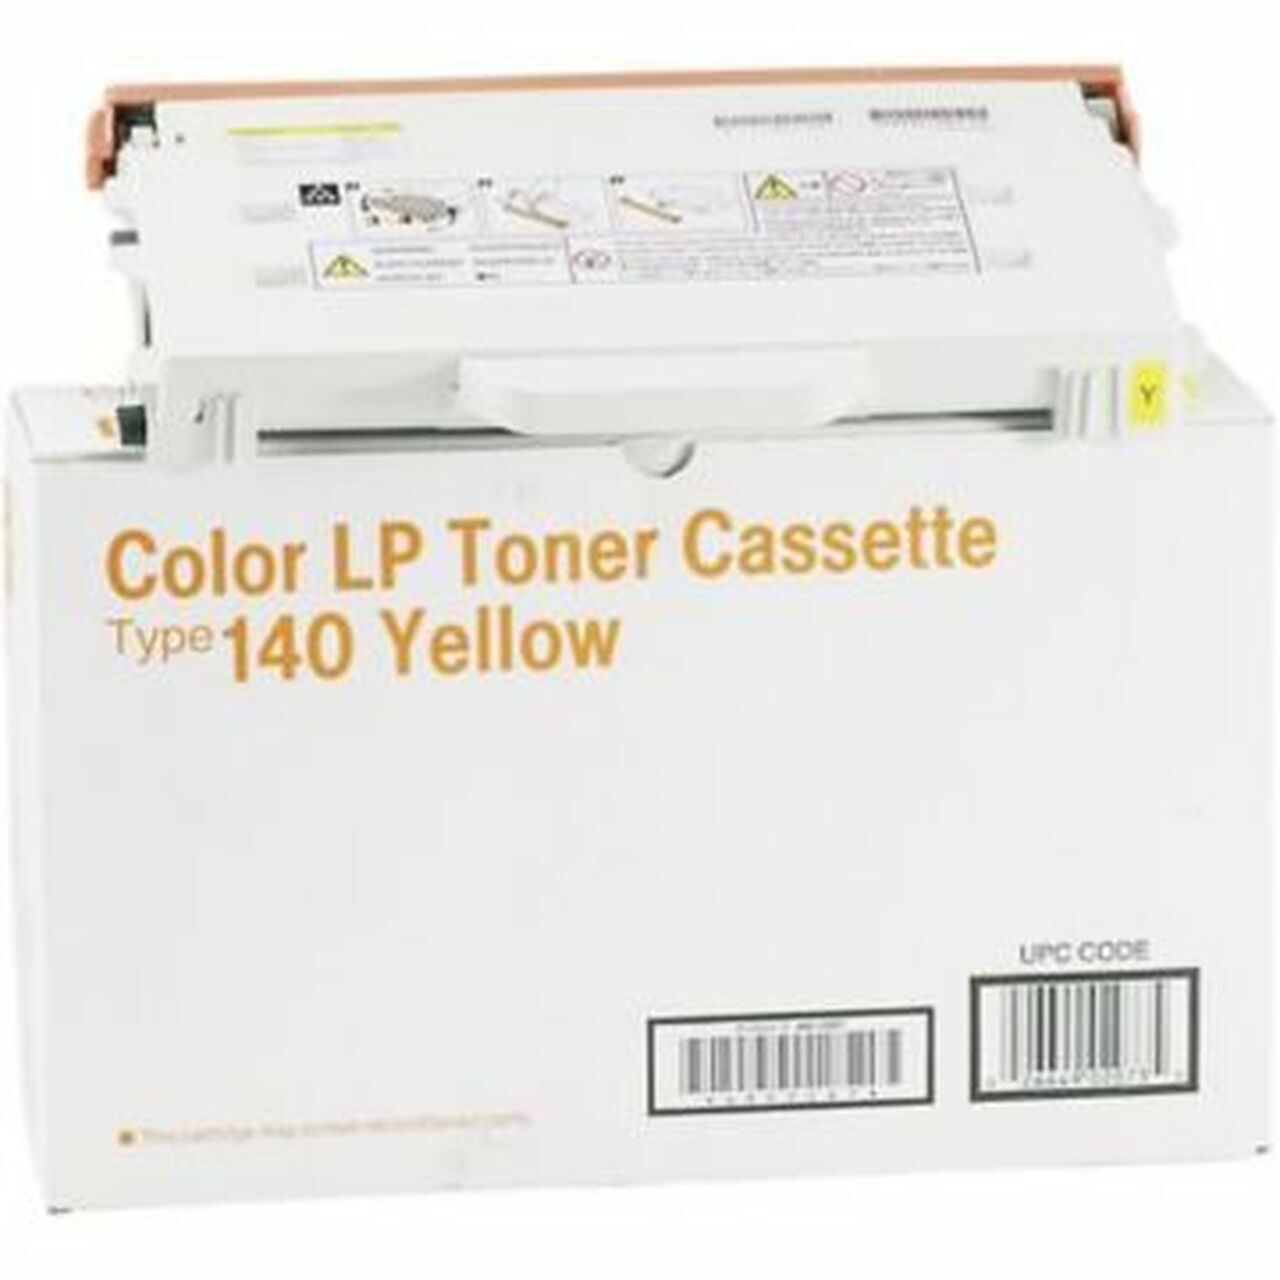 RICOH YELLOW TONER 6500 PAGE YIELD FOR SPC210